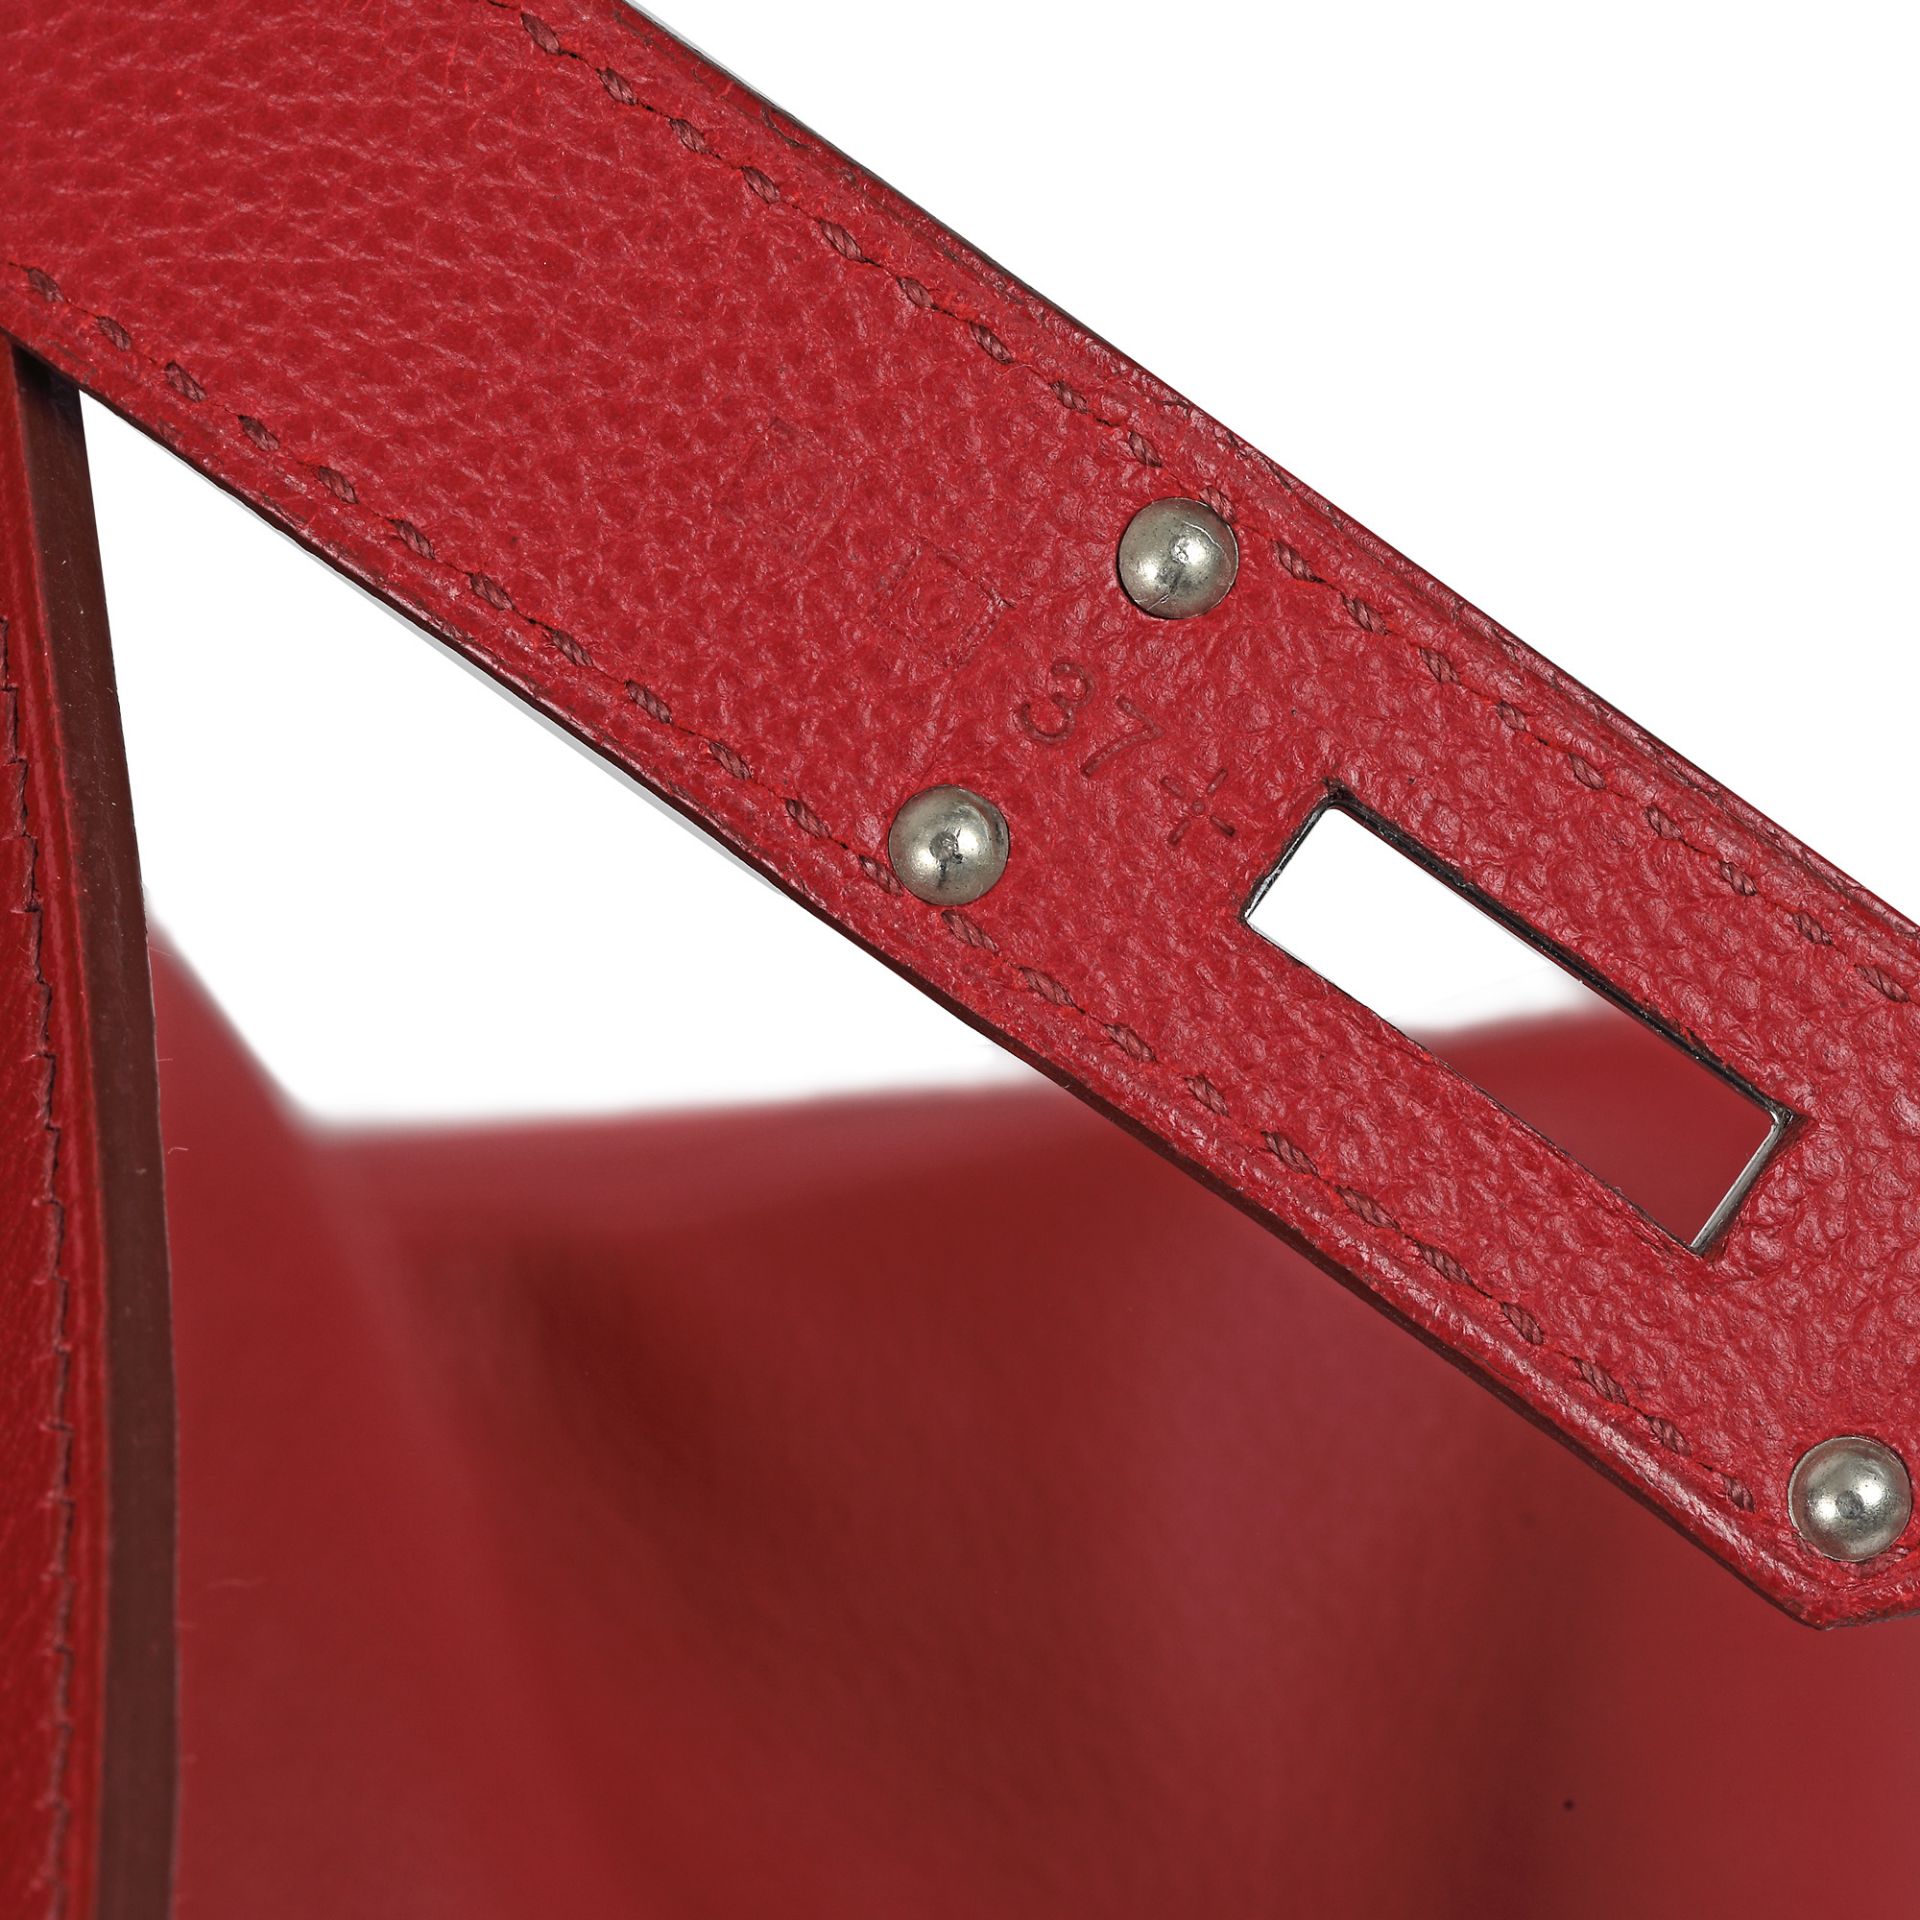 "Kelly Voyage" - Hermès travel bag, Clemence leather, Rouge Garance colour, limited edition - Image 4 of 4